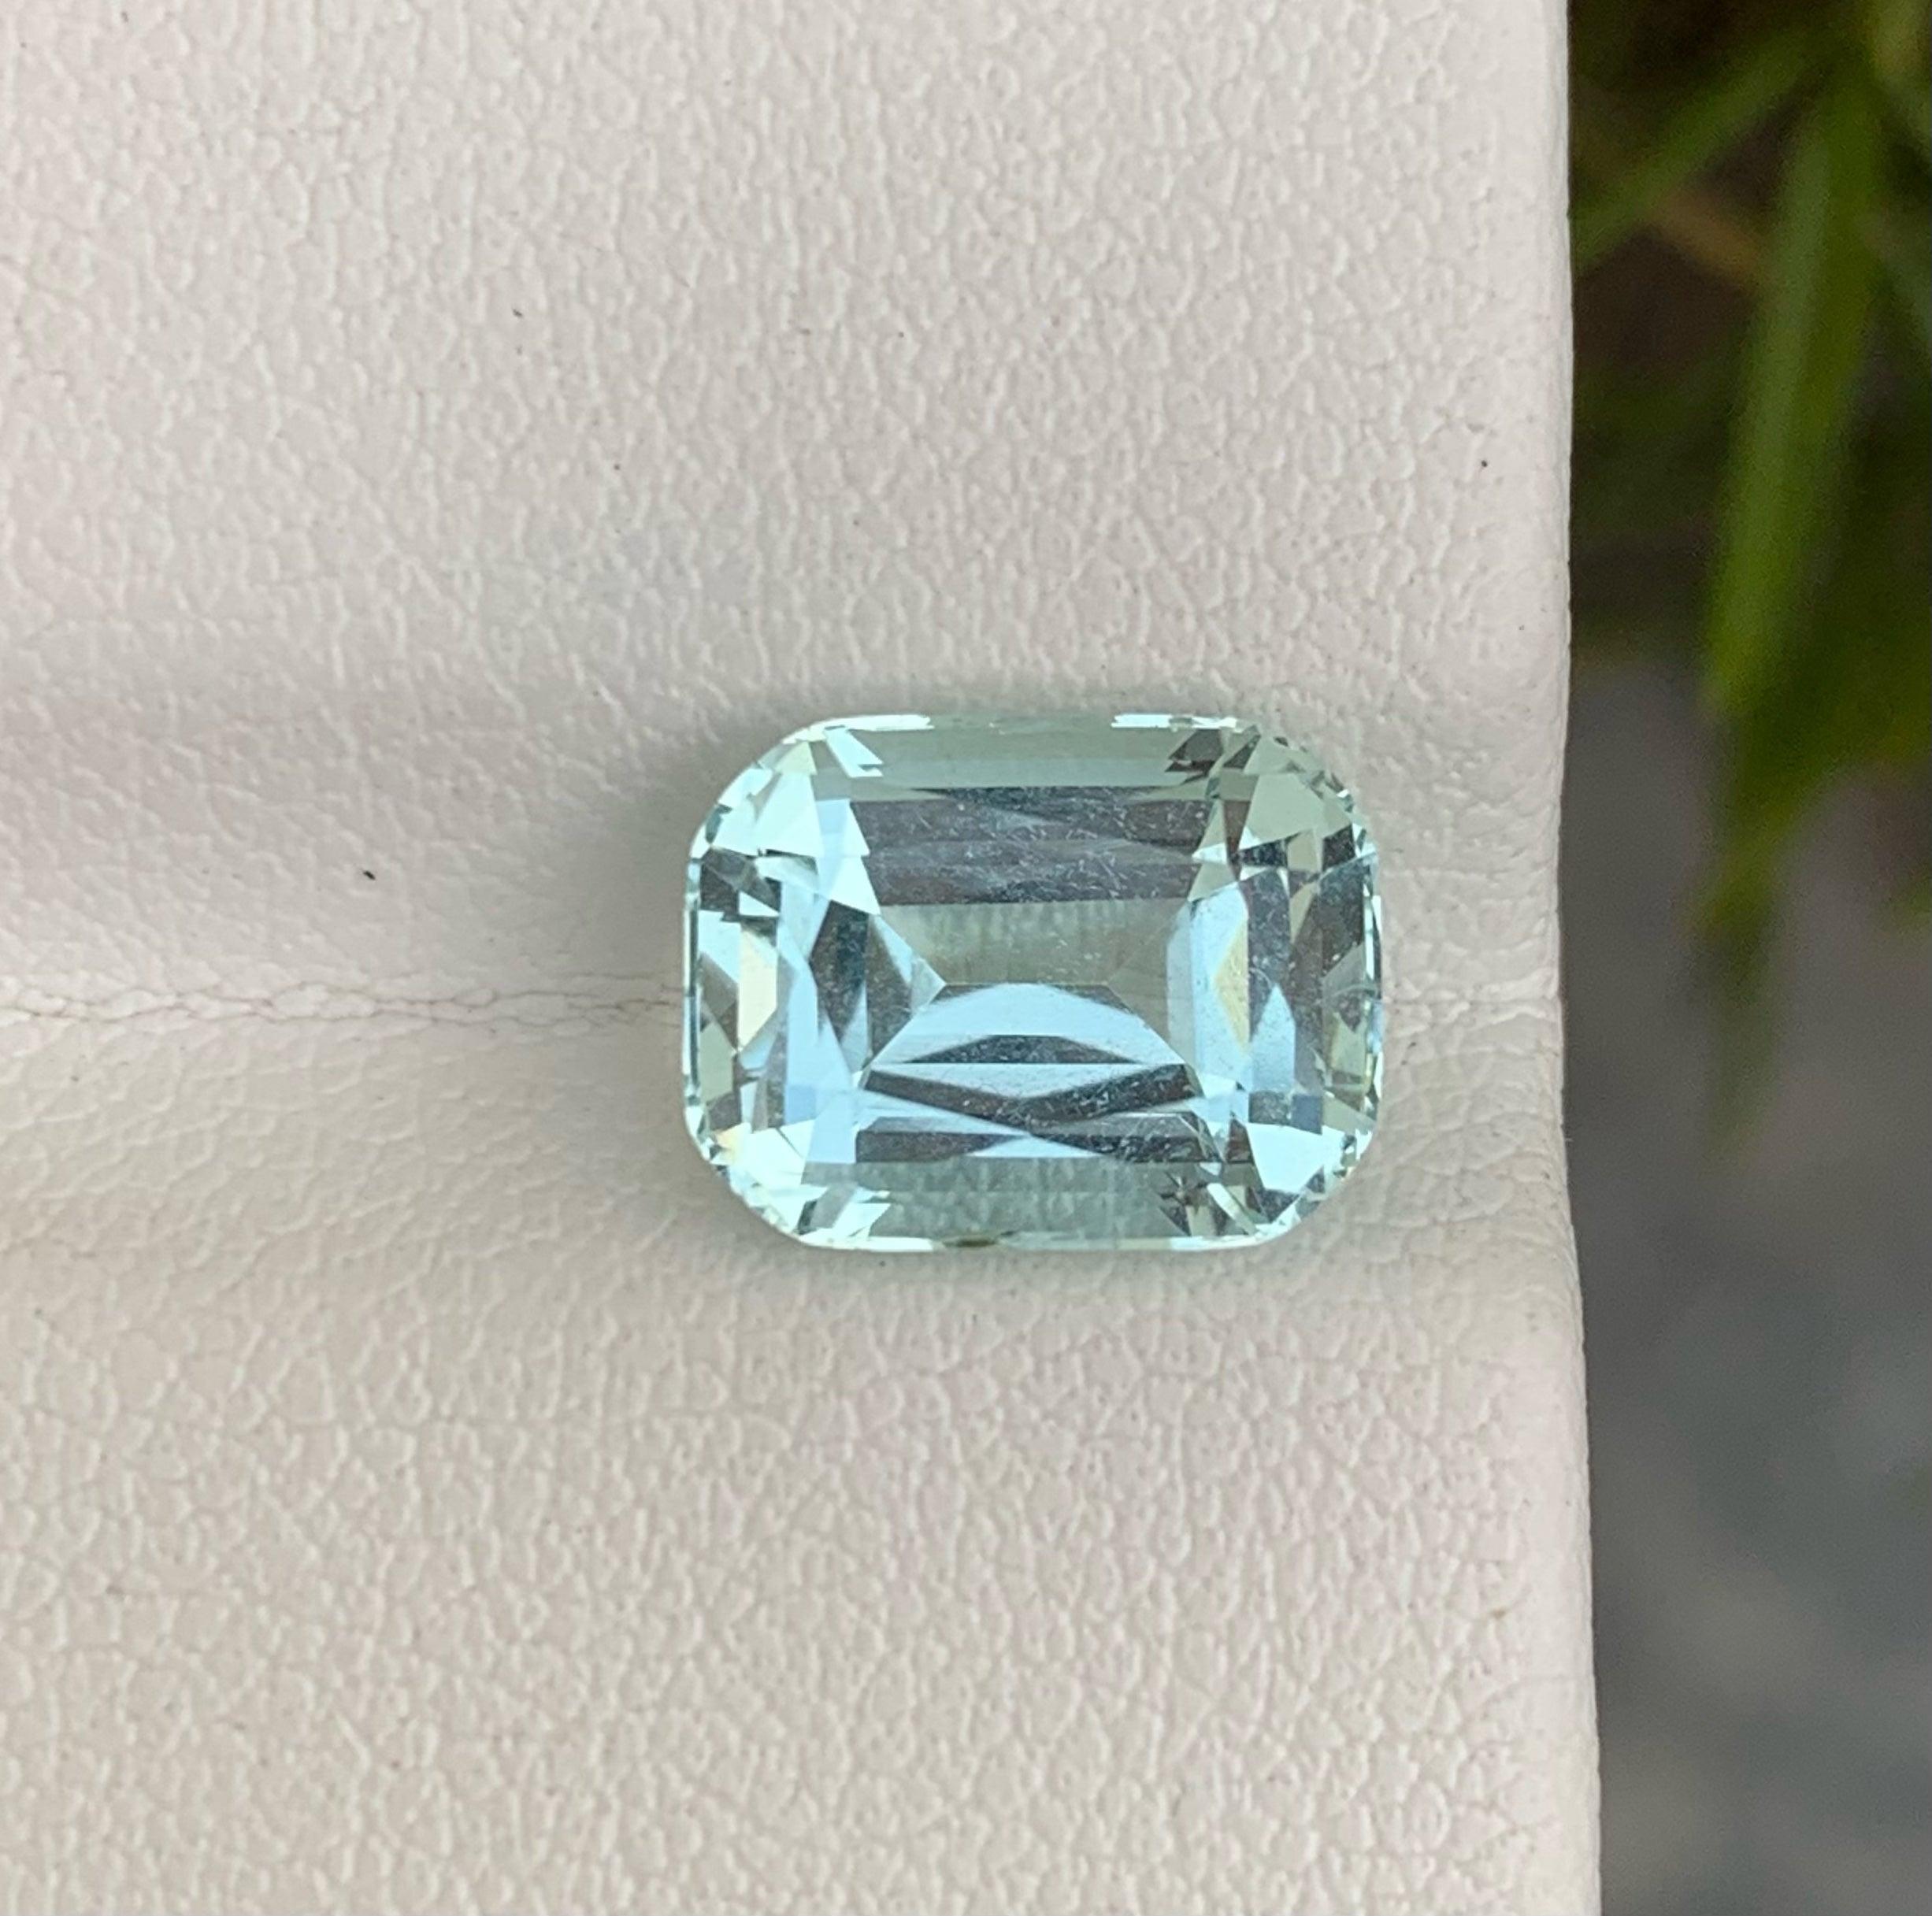 Lovely Light Blue Loose Aquamarine Stone, available for sale at wholesale price natural high quality 3.50 Carats Eye Clean Clarity Loose Aquamarine from Pakistan.

Product Information:
GEMSTONE NAME: Lovely Light Blue Loose Aquamarine